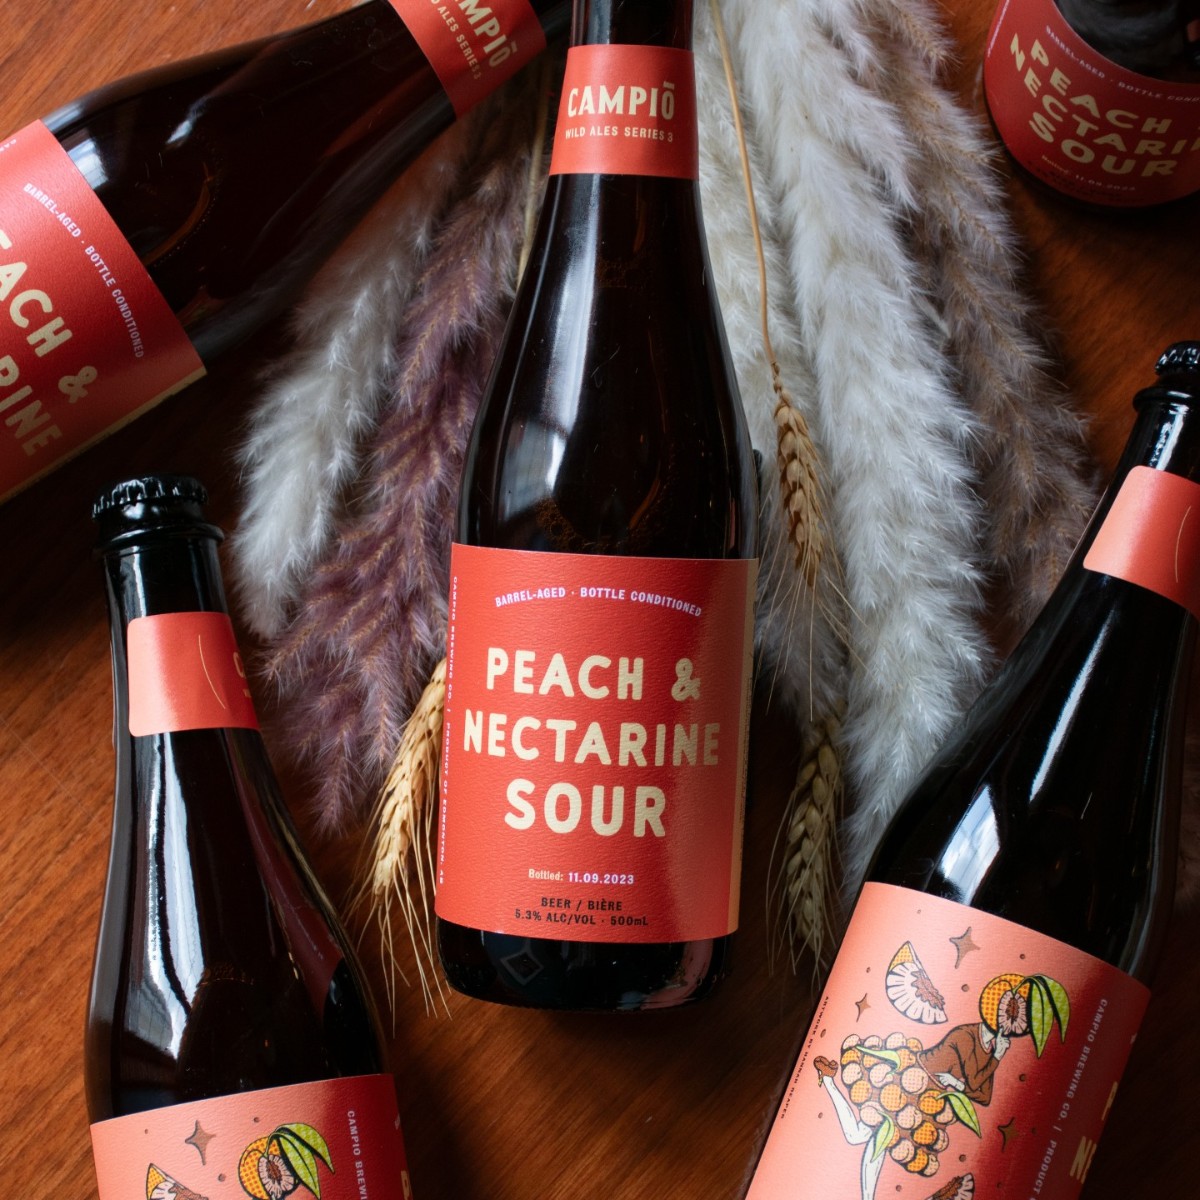 Take a walk on the WILD SIDE with the newest release from the Campio Cellar! This full bodied, distinctively sour and funky beer with stone fruit sweetness will have you thinking you're drinking a bottle of funky fuzzy peaches. More info on Wild Ales: brnw.ch/21wI3xB